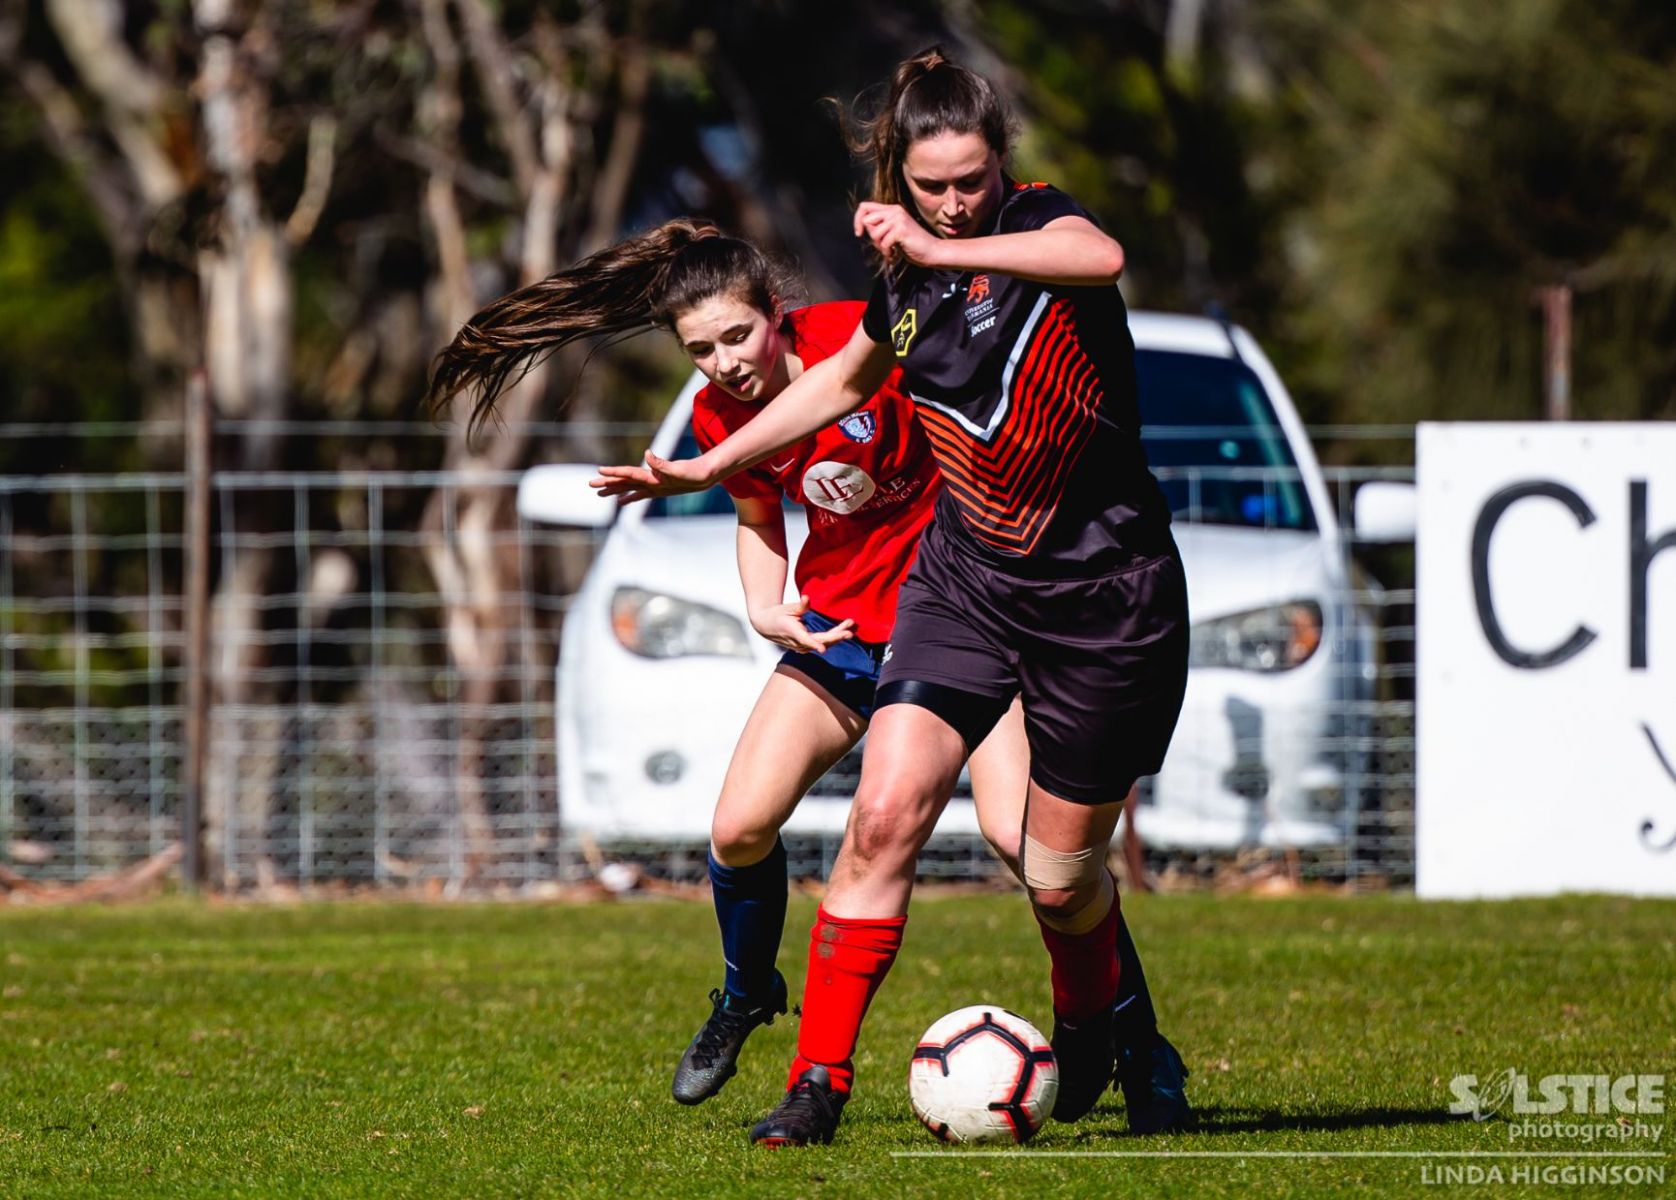 Gallery: Tasmania Women's Statewide Cup - Beyond 90